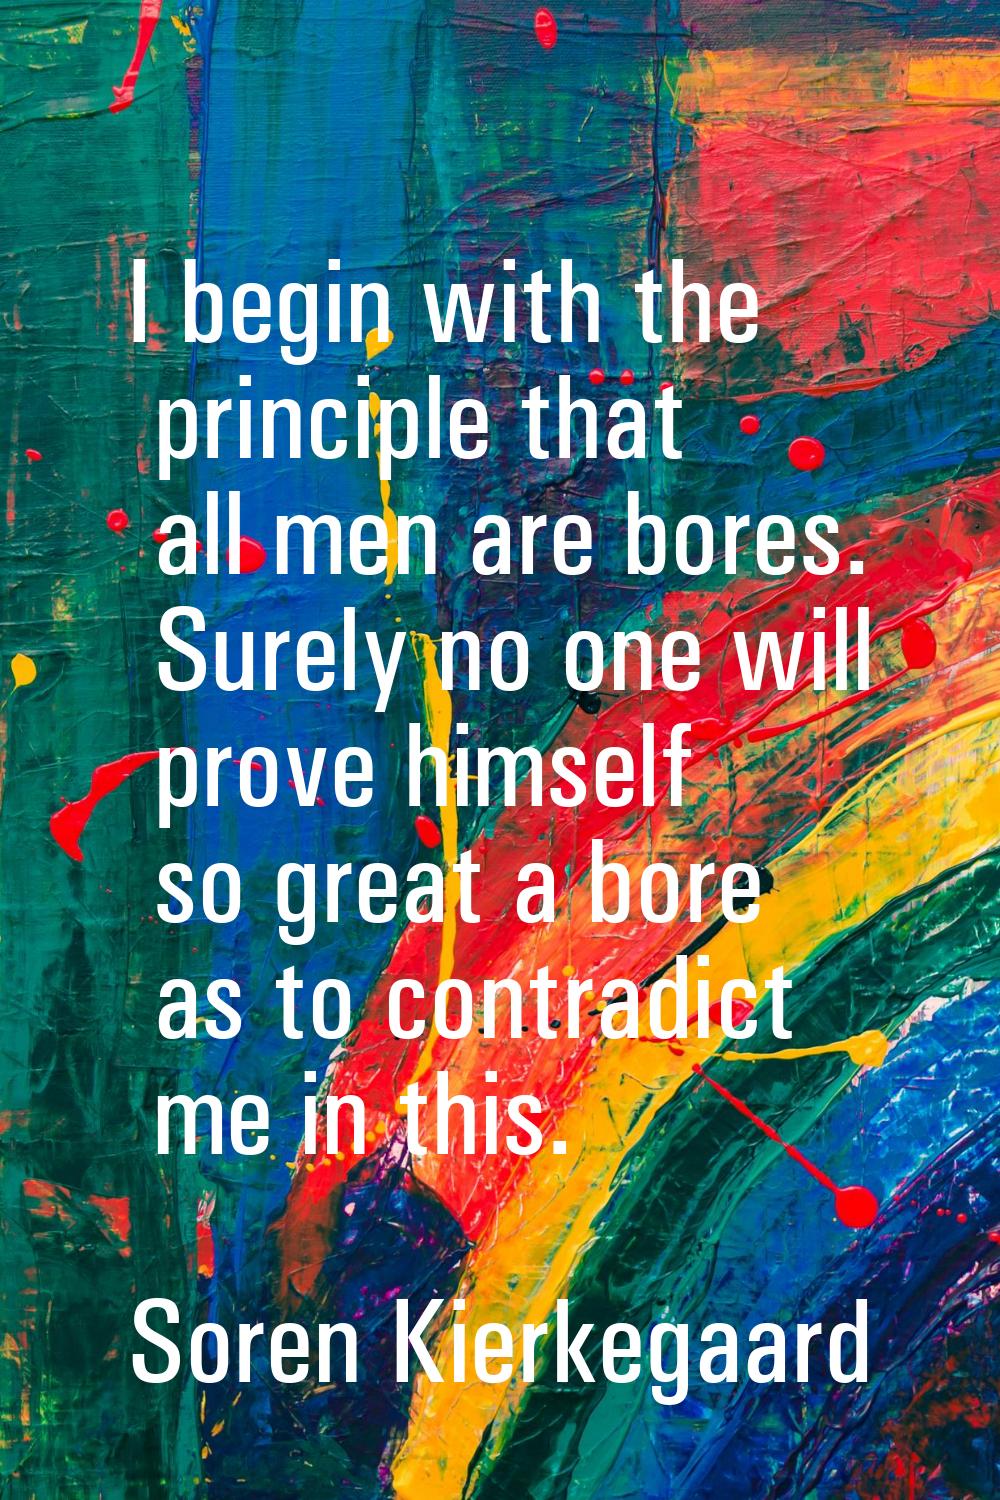 I begin with the principle that all men are bores. Surely no one will prove himself so great a bore